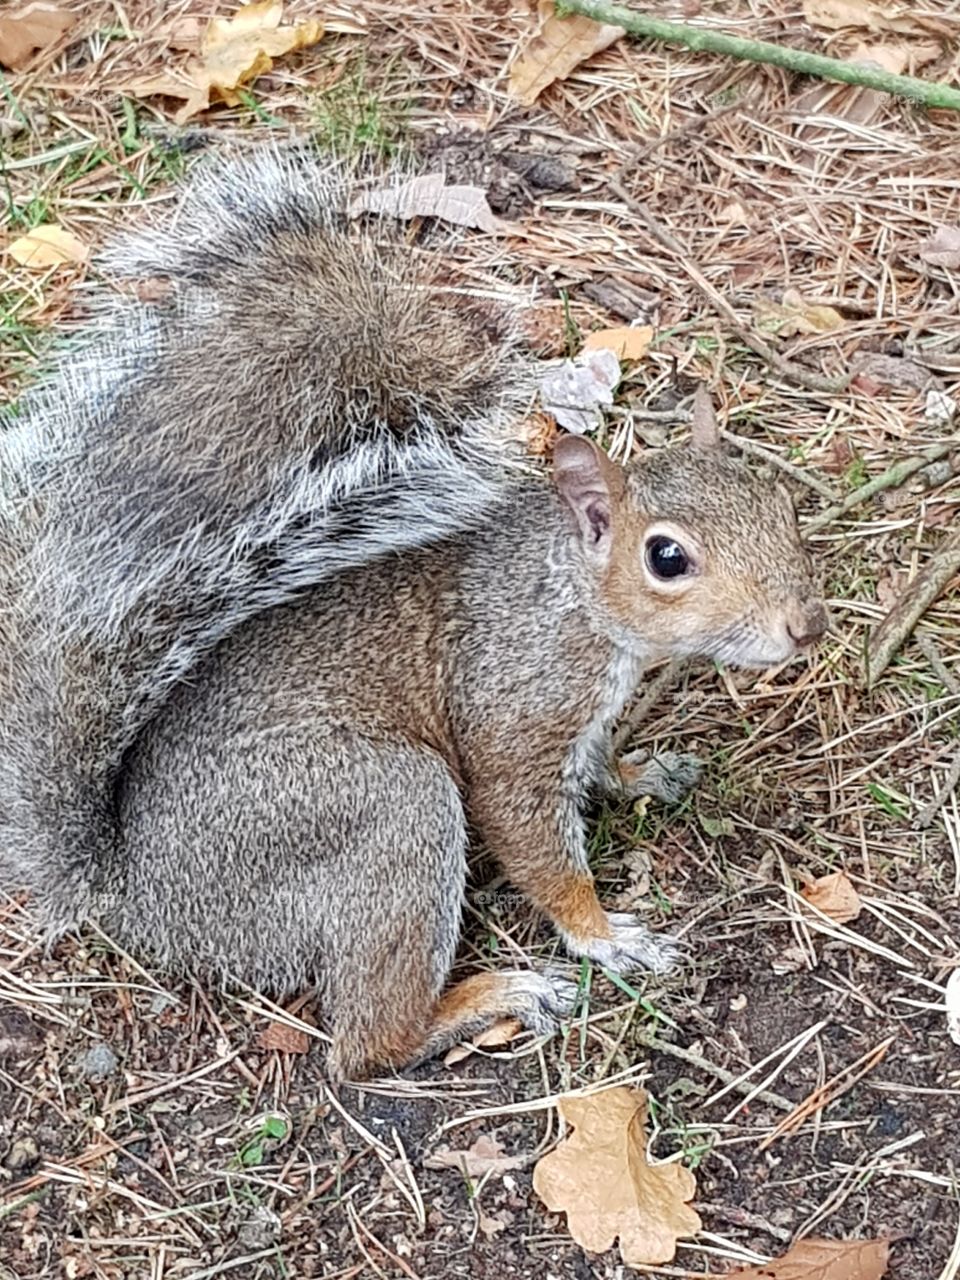 It's not every day you can get close to the grey squirrel. observing their eating behaviours, foraging and digging is truly amazing